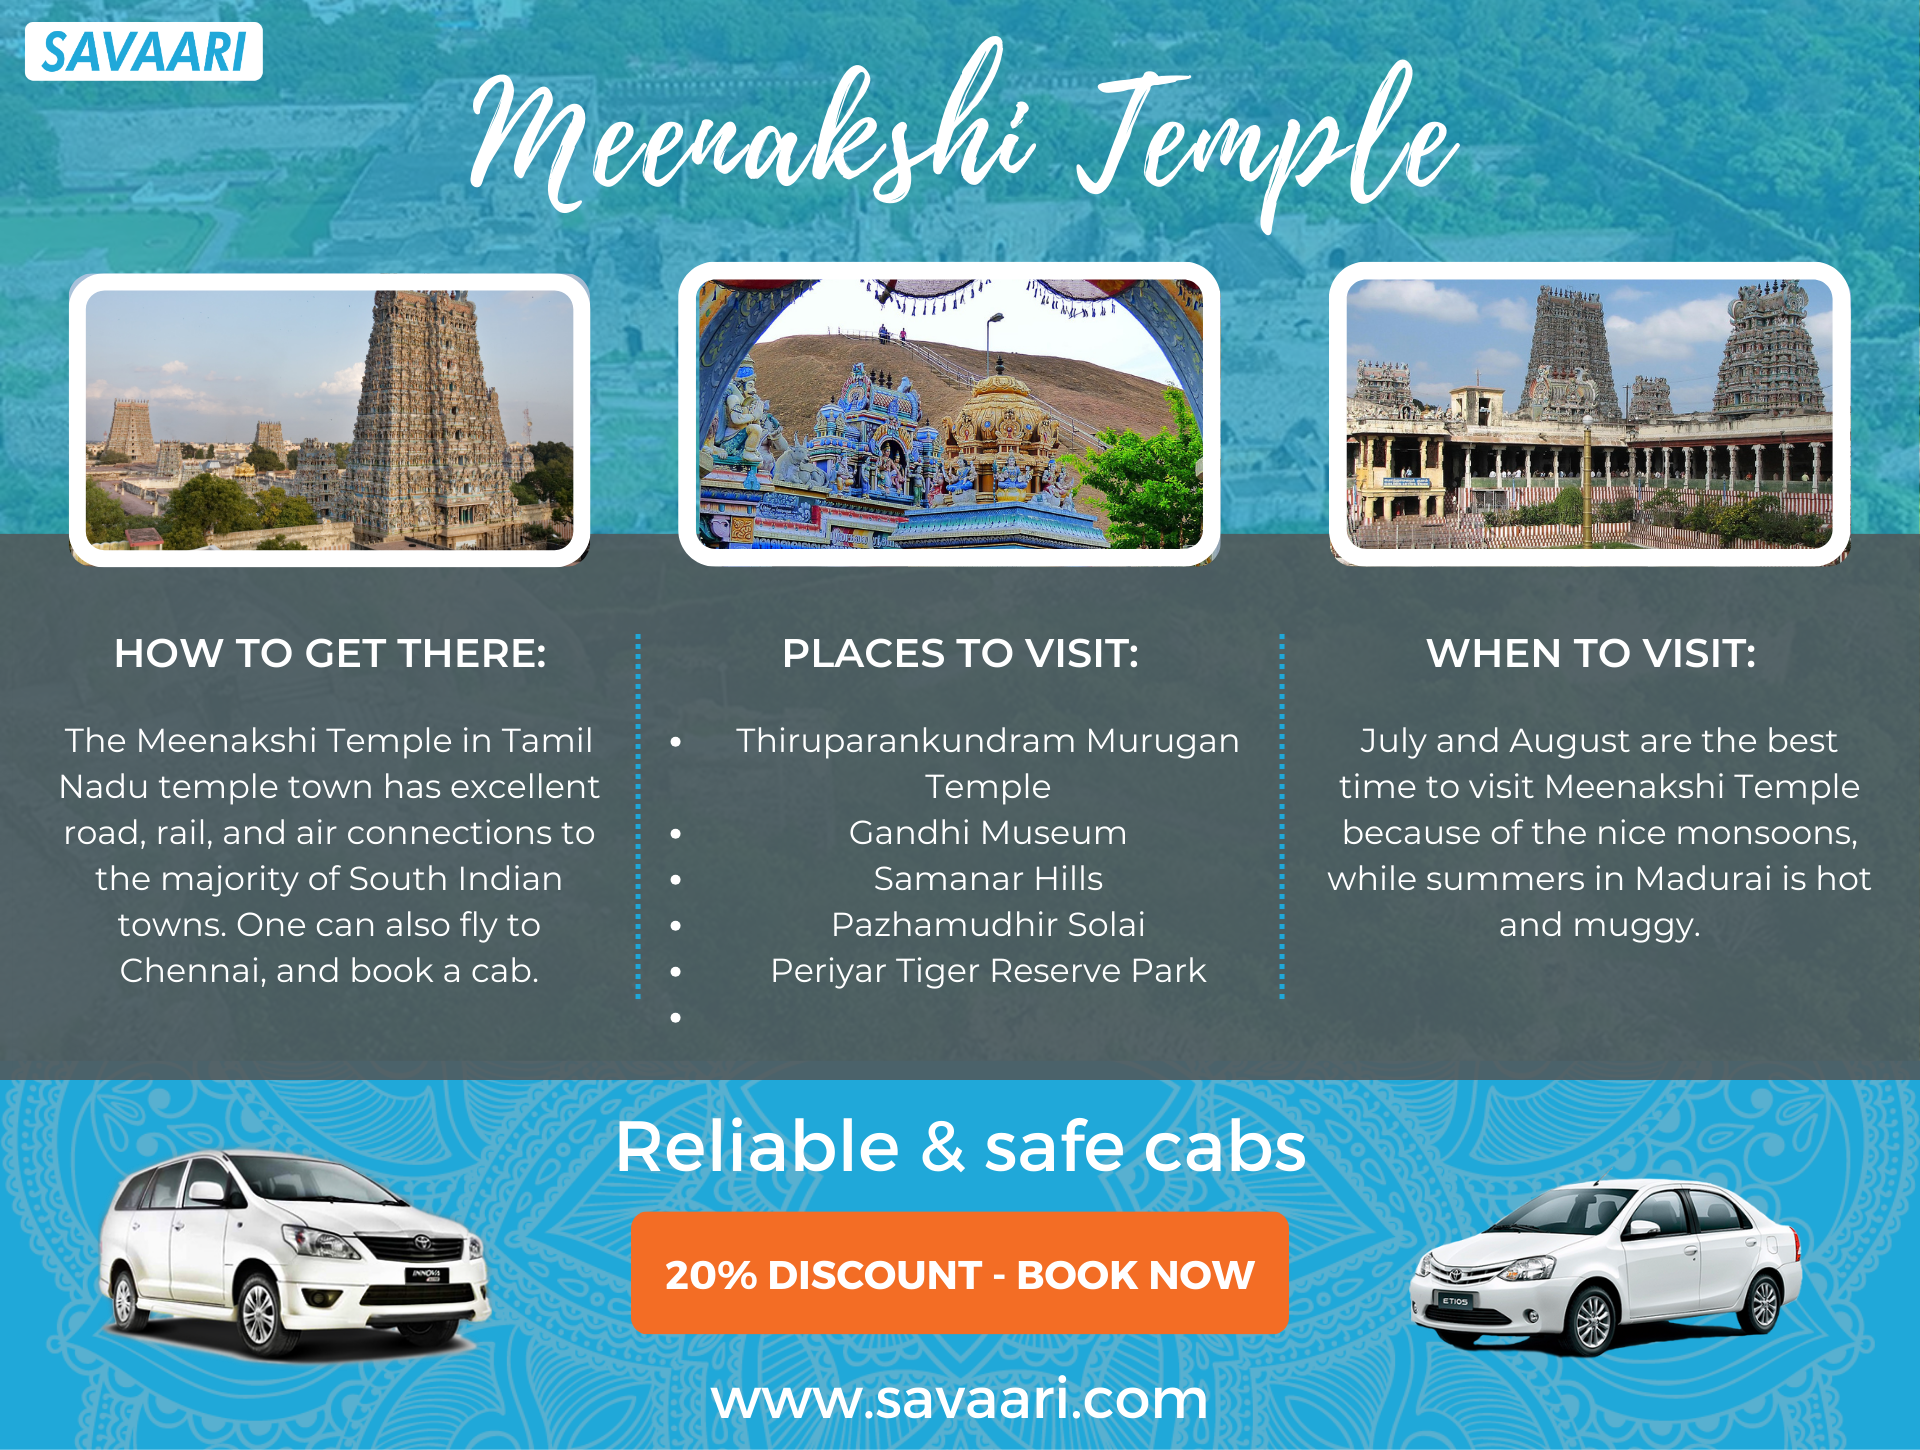 Things to do in Meenakshi Temple